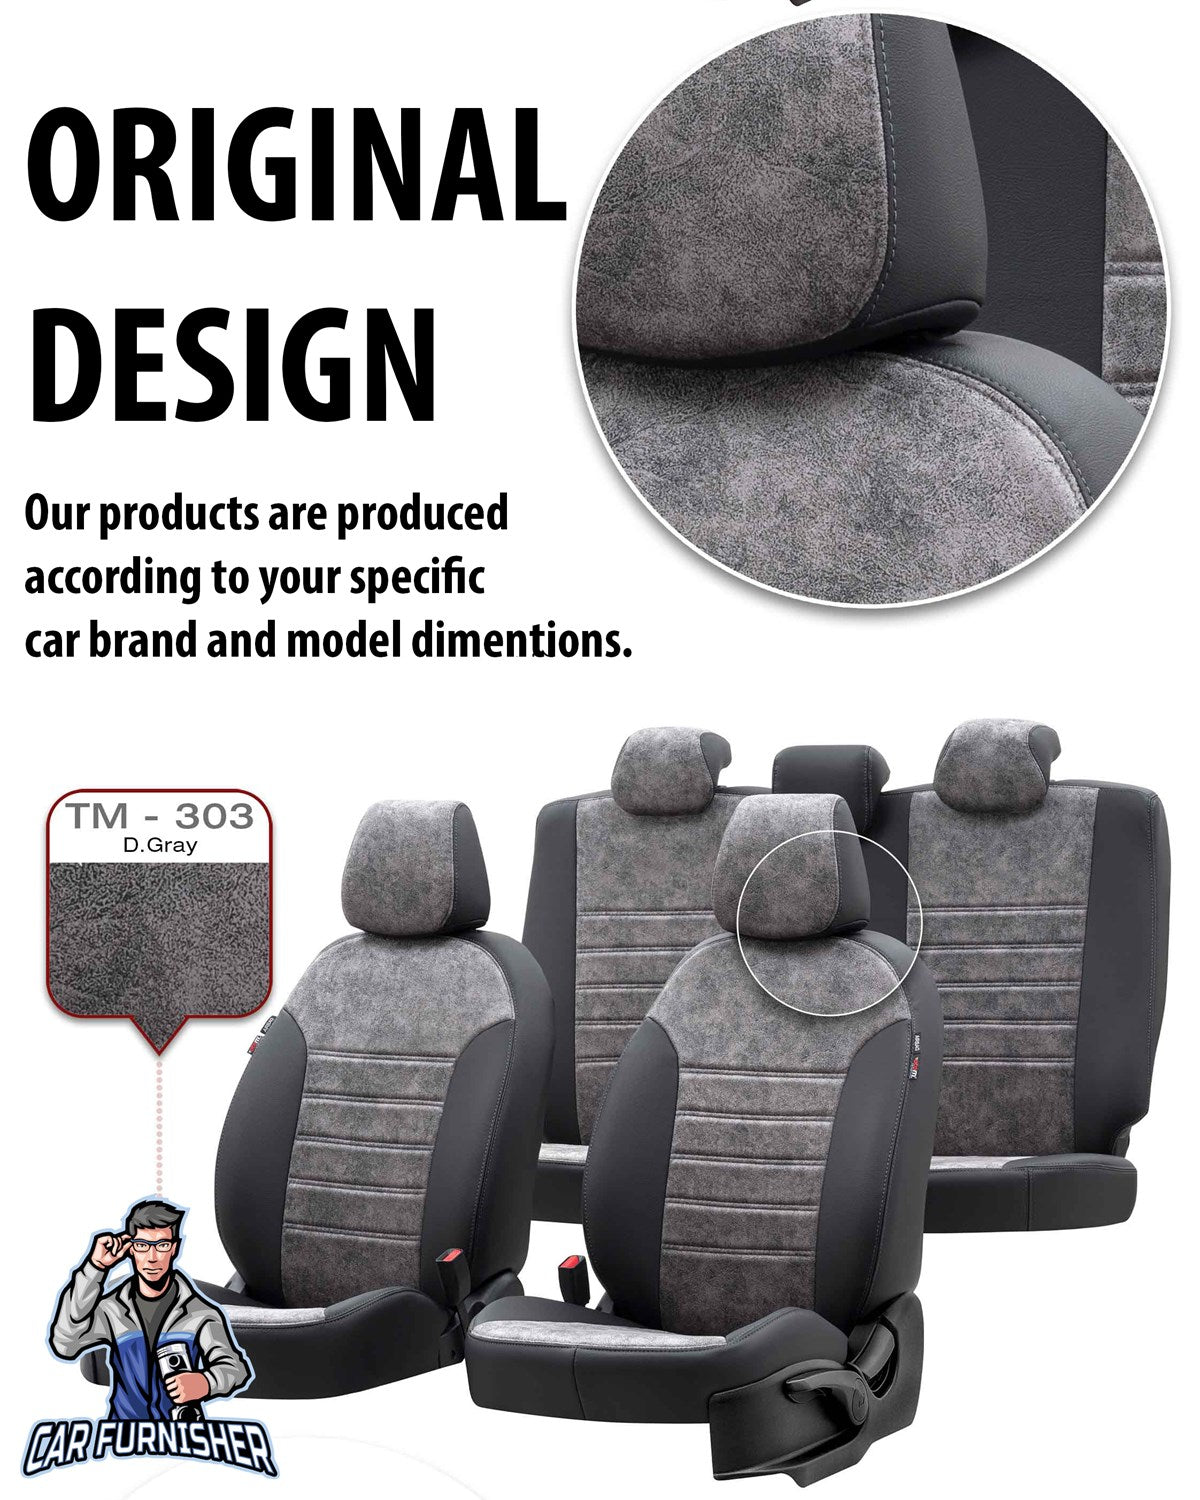 Skoda Roomstar Seat Cover Milano Suede Design Smoked Black Leather & Suede Fabric